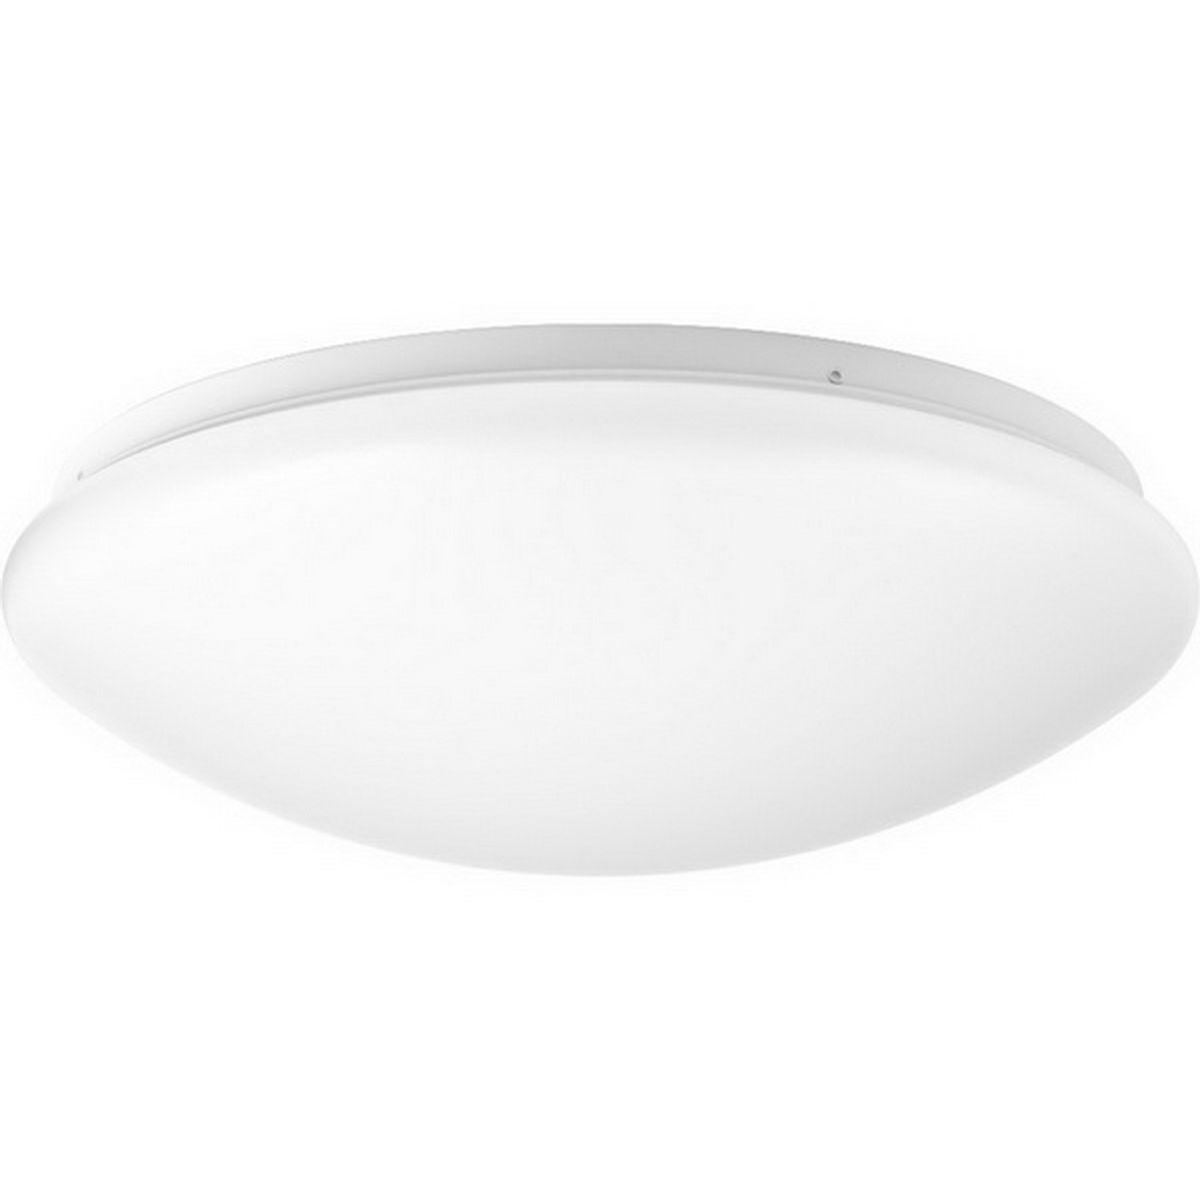 Drums and Clouds 14 in LED Ceiling Puff Light 1845 Lumens 3000K White finish